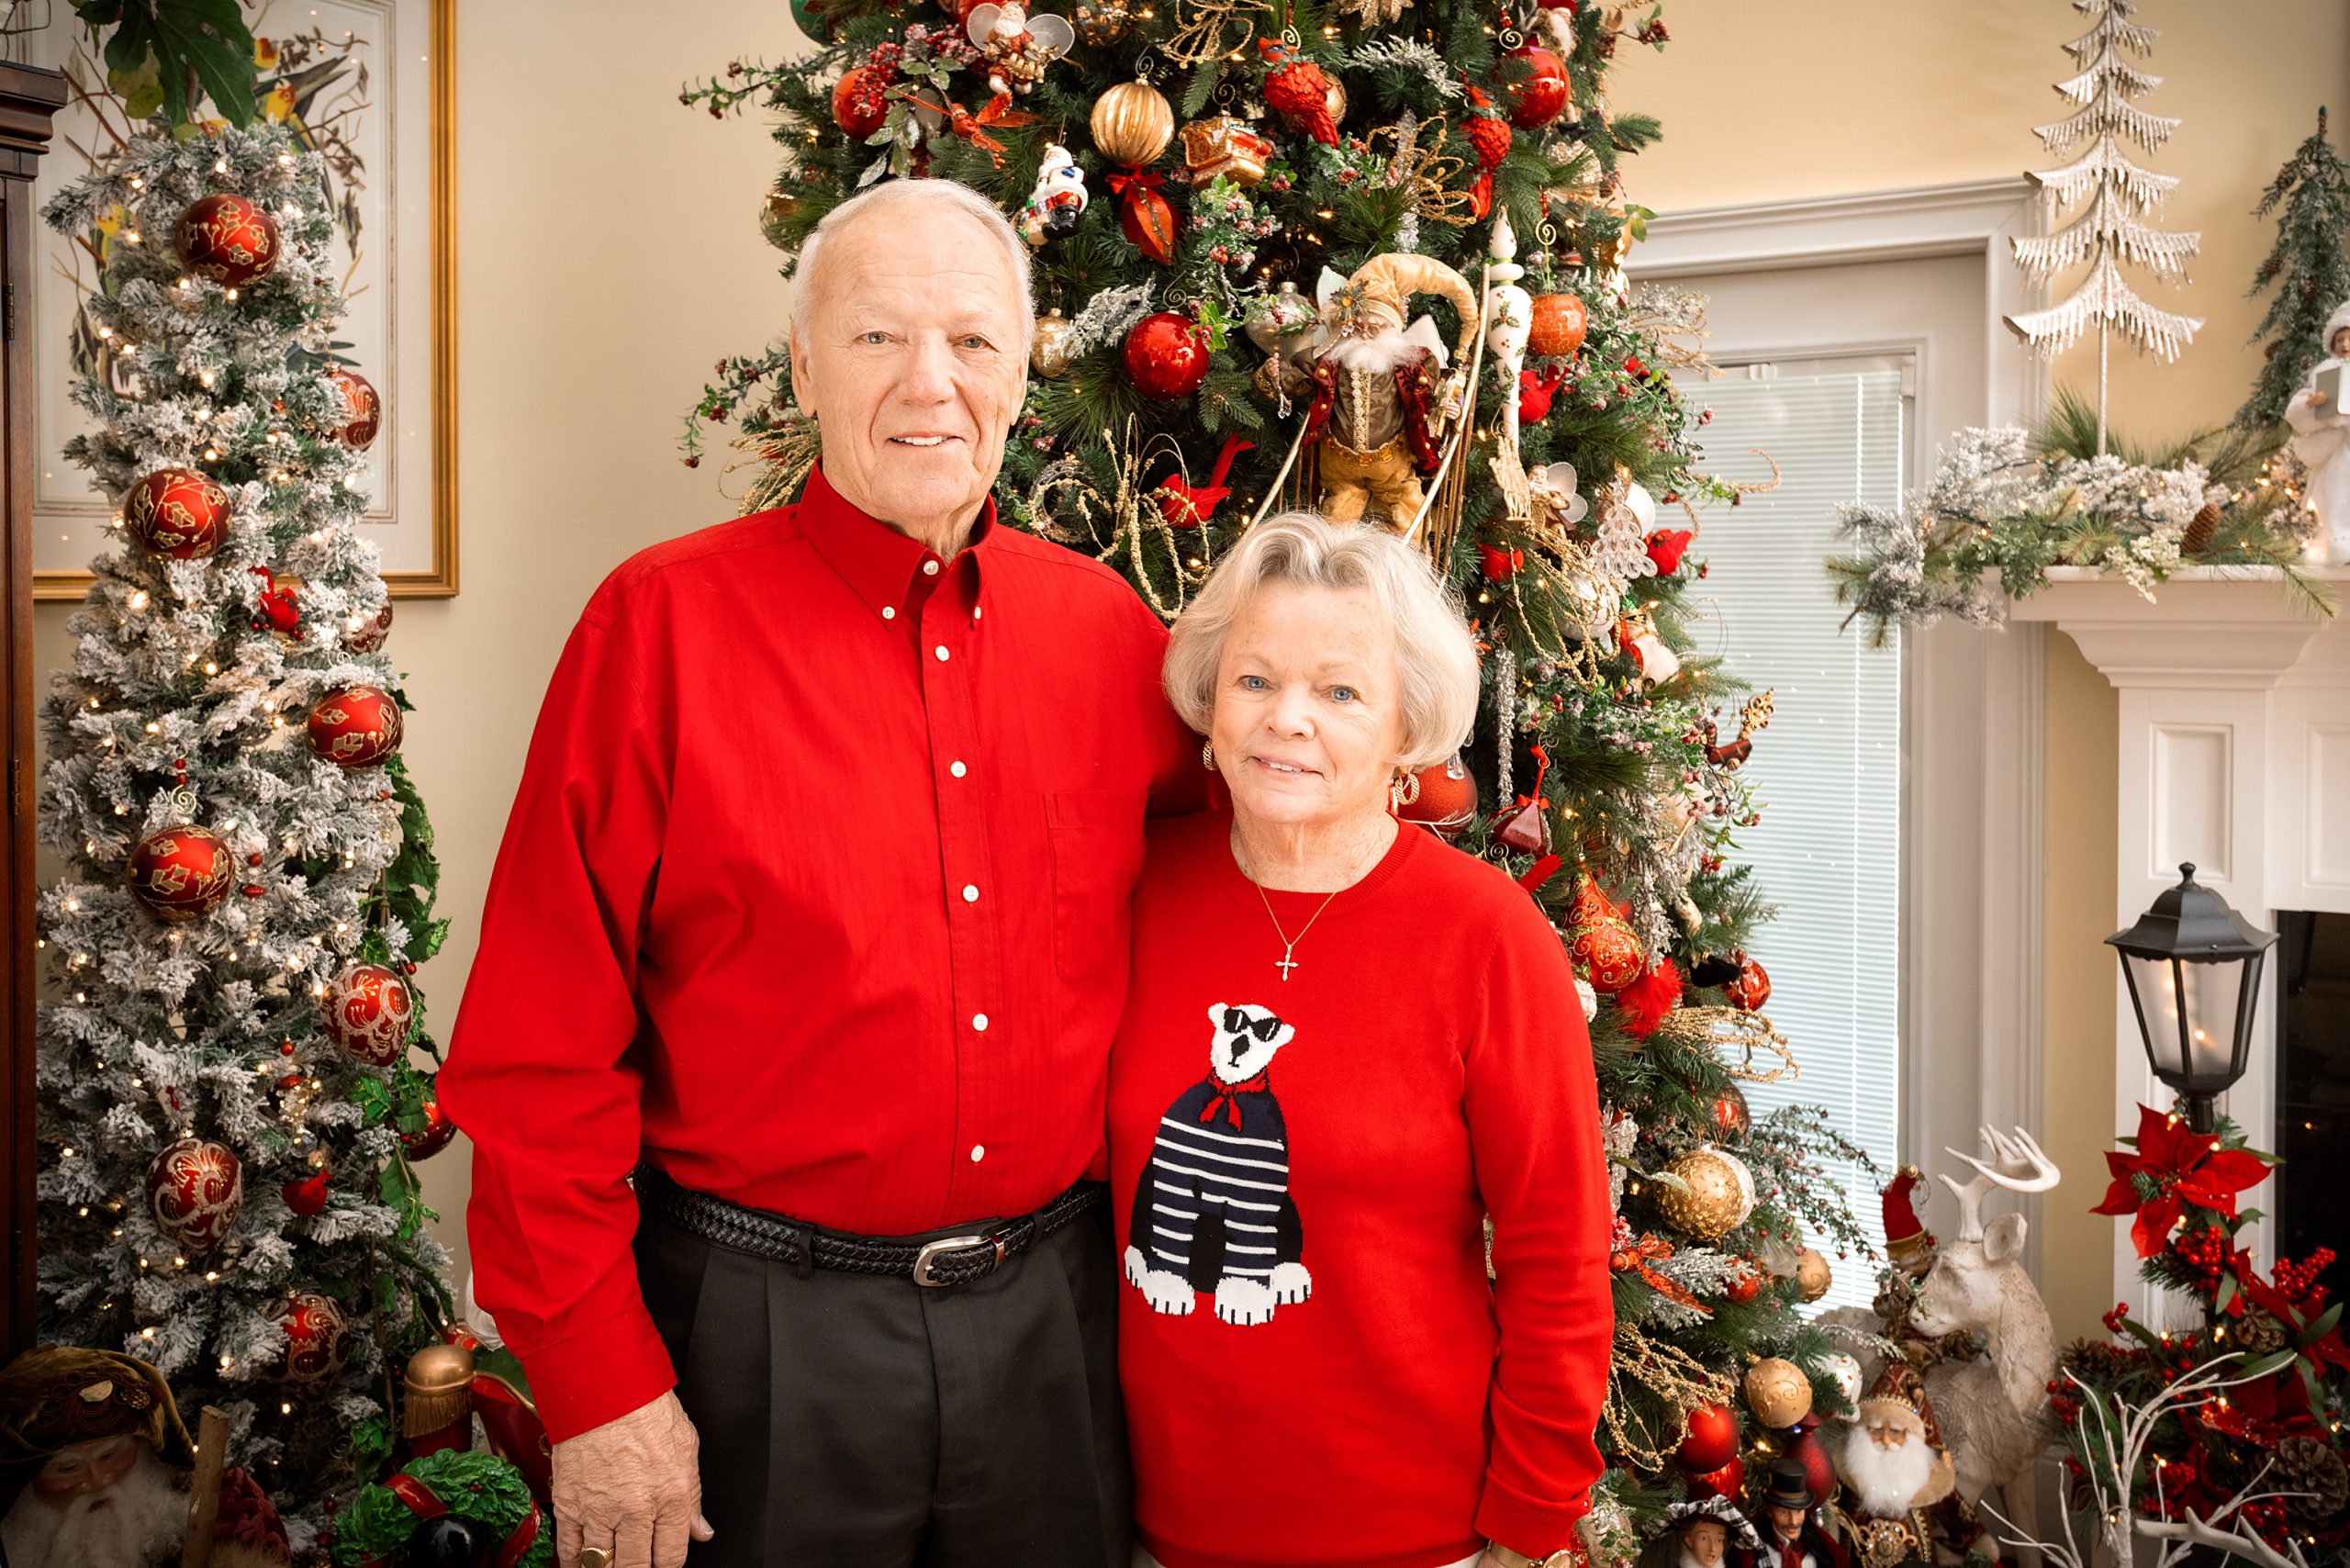 Ann and Chester Floyd’s Lake Murray home is a festive wonderland filled with Christmas joy in the celebration of Christ’s birth. Every room glitters with collected ornaments, creches, magical trees, lights, tinsel, fairies, and angels.